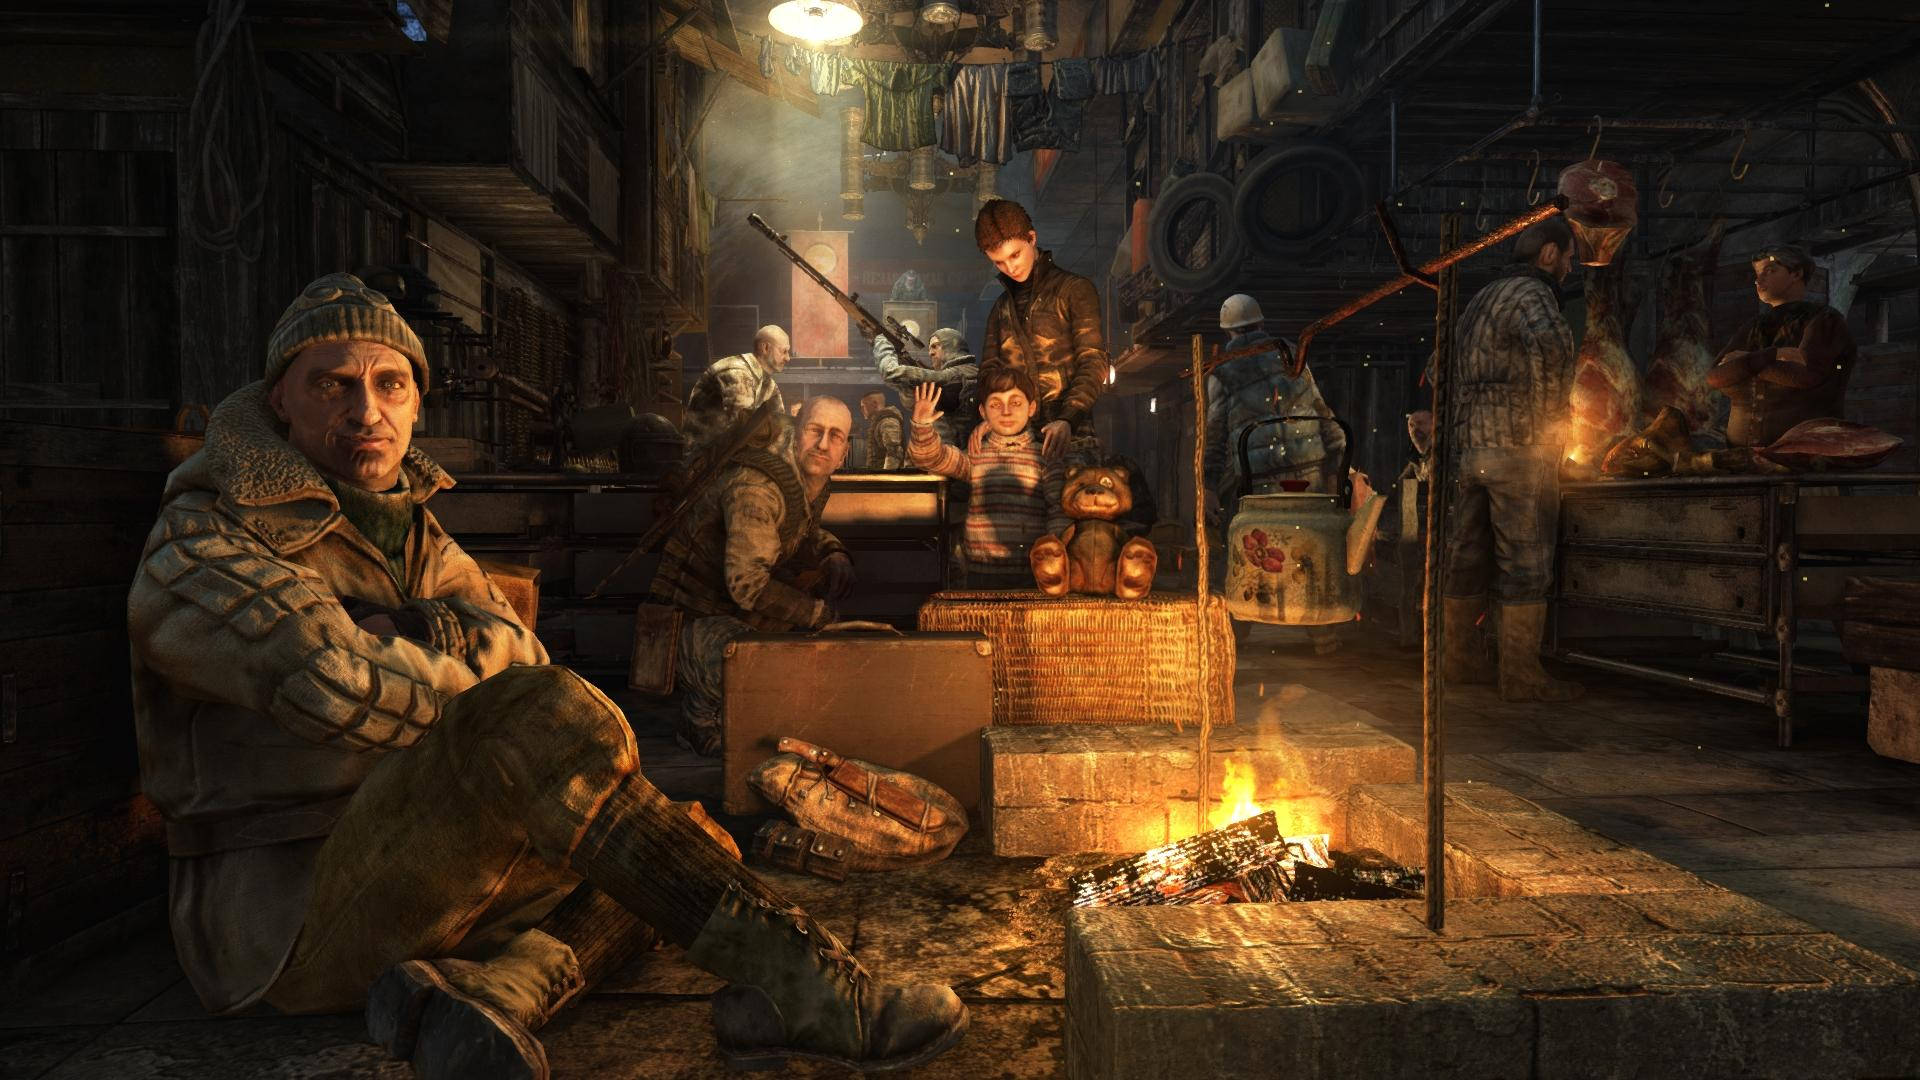 A Screenshot Of A Game With People In A Dark Room Wallpaper